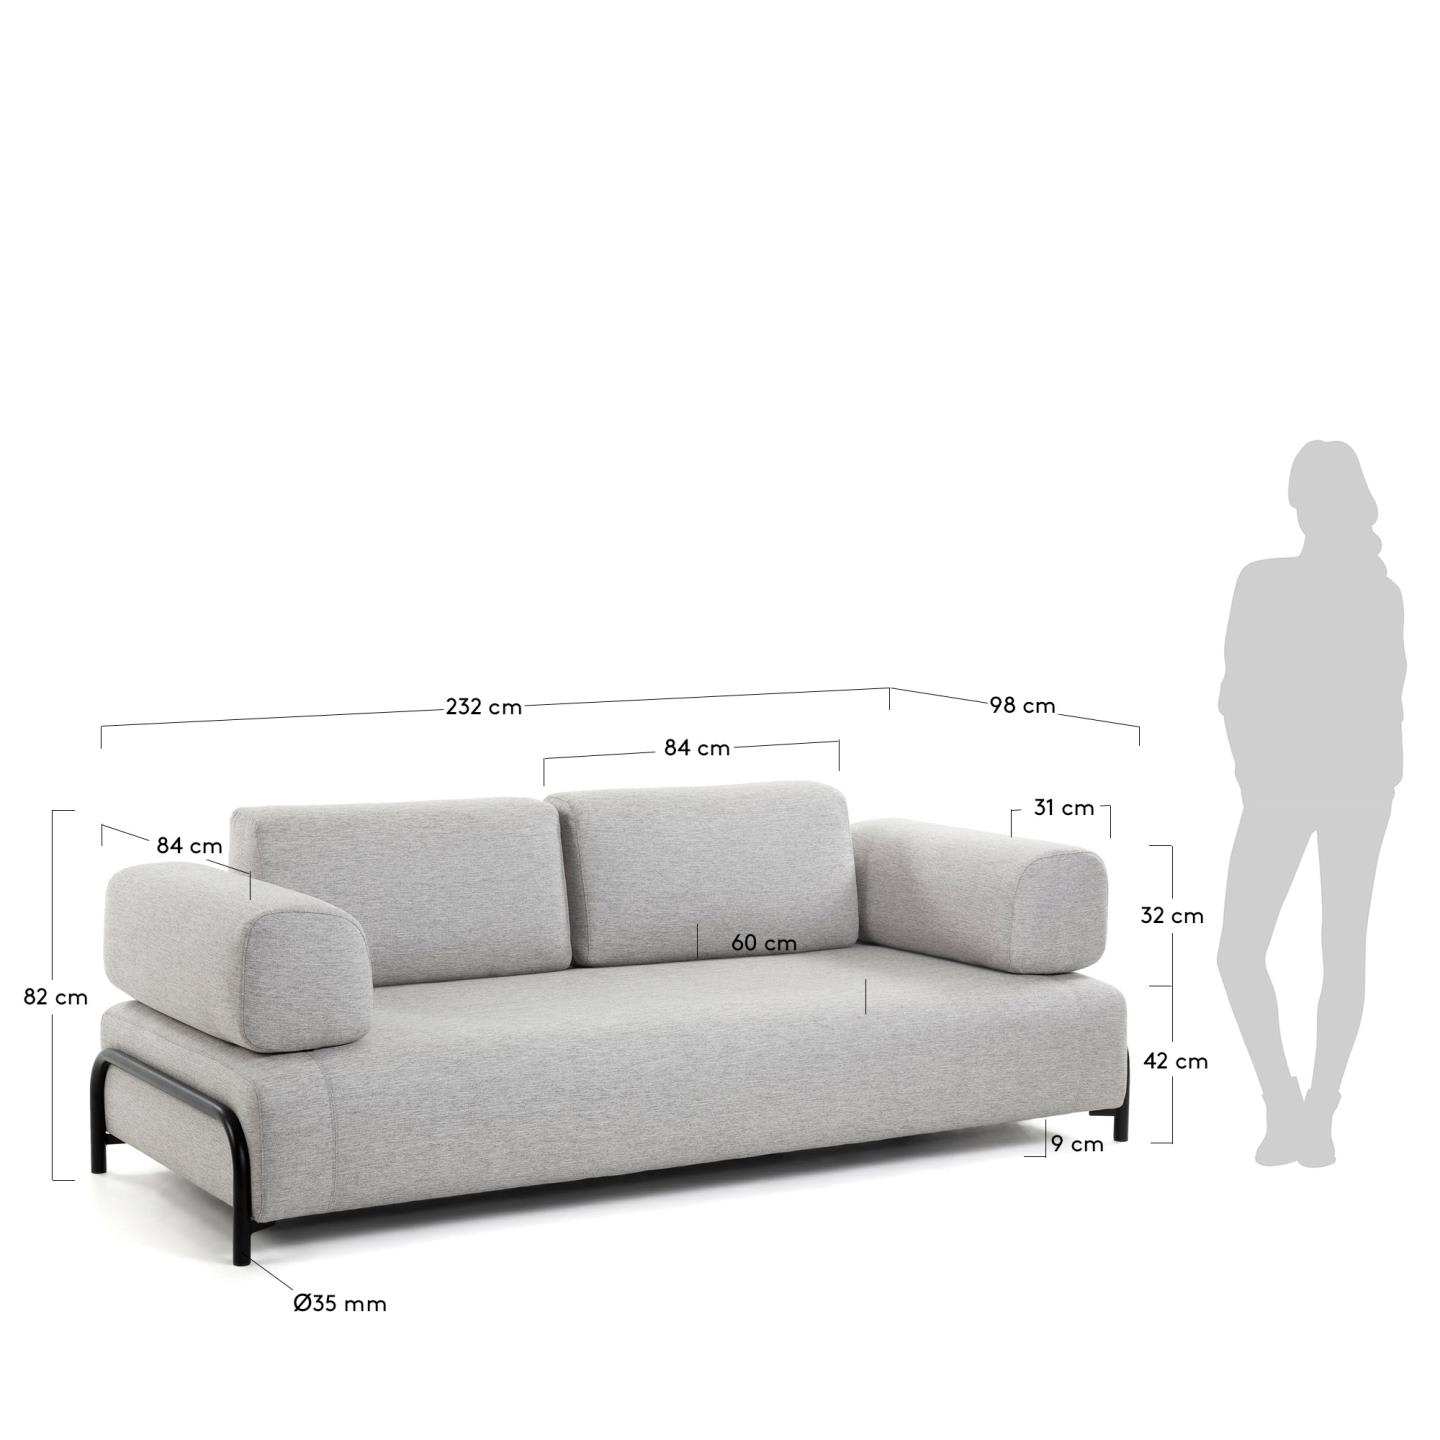 Compo 3 seater sofa in light grey, 232 cm - sizes